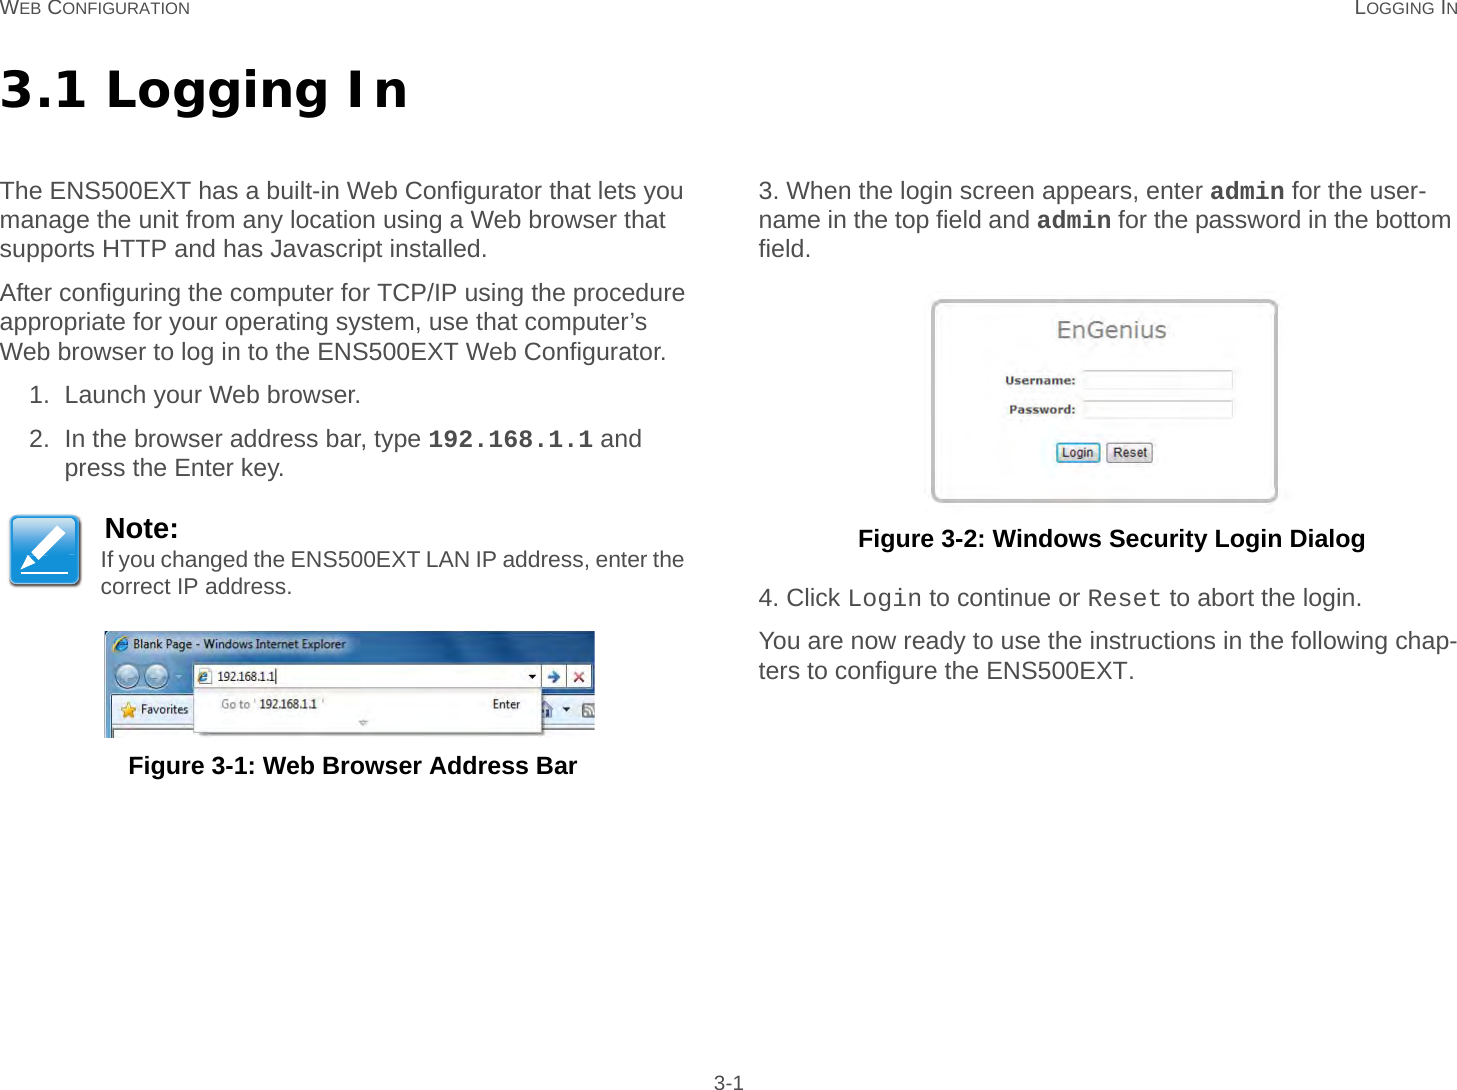 WEB CONFIGURATION LOGGING IN 3-13.1 Logging InThe ENS500EXT has a built-in Web Configurator that lets you manage the unit from any location using a Web browser that supports HTTP and has Javascript installed.After configuring the computer for TCP/IP using the procedure appropriate for your operating system, use that computer’s Web browser to log in to the ENS500EXT Web Configurator.1. Launch your Web browser.2. In the browser address bar, type 192.168.1.1 and press the Enter key. Figure 3-1: Web Browser Address Bar3. When the login screen appears, enter admin for the user-name in the top field and admin for the password in the bottom field. Figure 3-2: Windows Security Login Dialog4. Click Login to continue or Reset to abort the login.You are now ready to use the instructions in the following chap-ters to configure the ENS500EXT.Note:If you changed the ENS500EXT LAN IP address, enter the correct IP address.